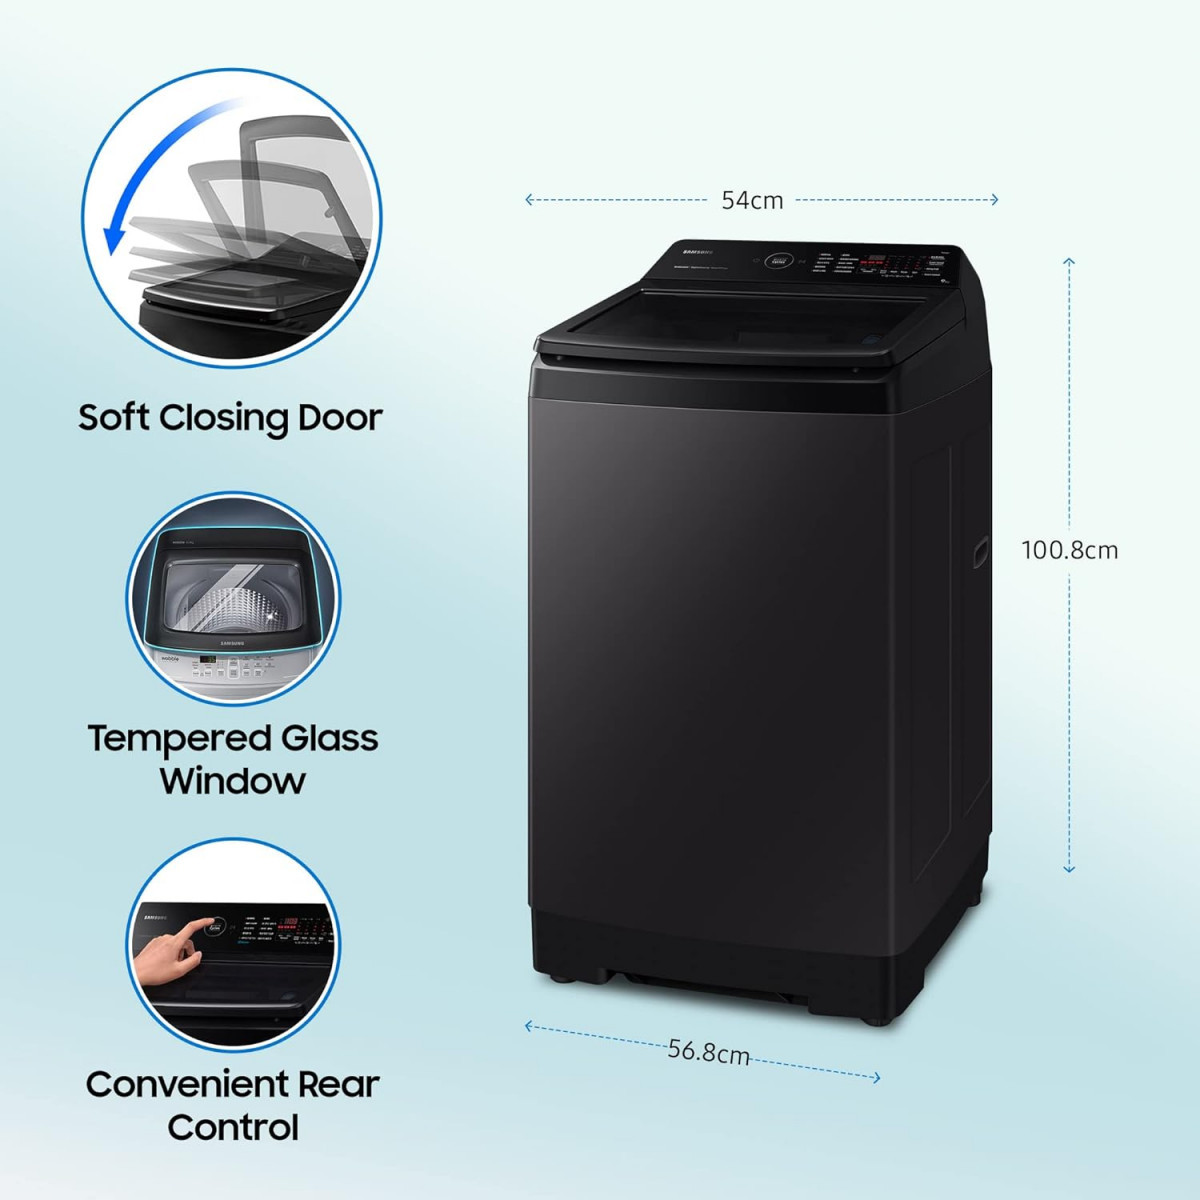 Samsung 9 Kg 5 Star Eco Bubble Technology With Super Speed Wi-Fi Digital Inverter Motor Dual Storm Fully-Automatic Top Load Washing Machine WA90BG4546BVTL Black Caviar